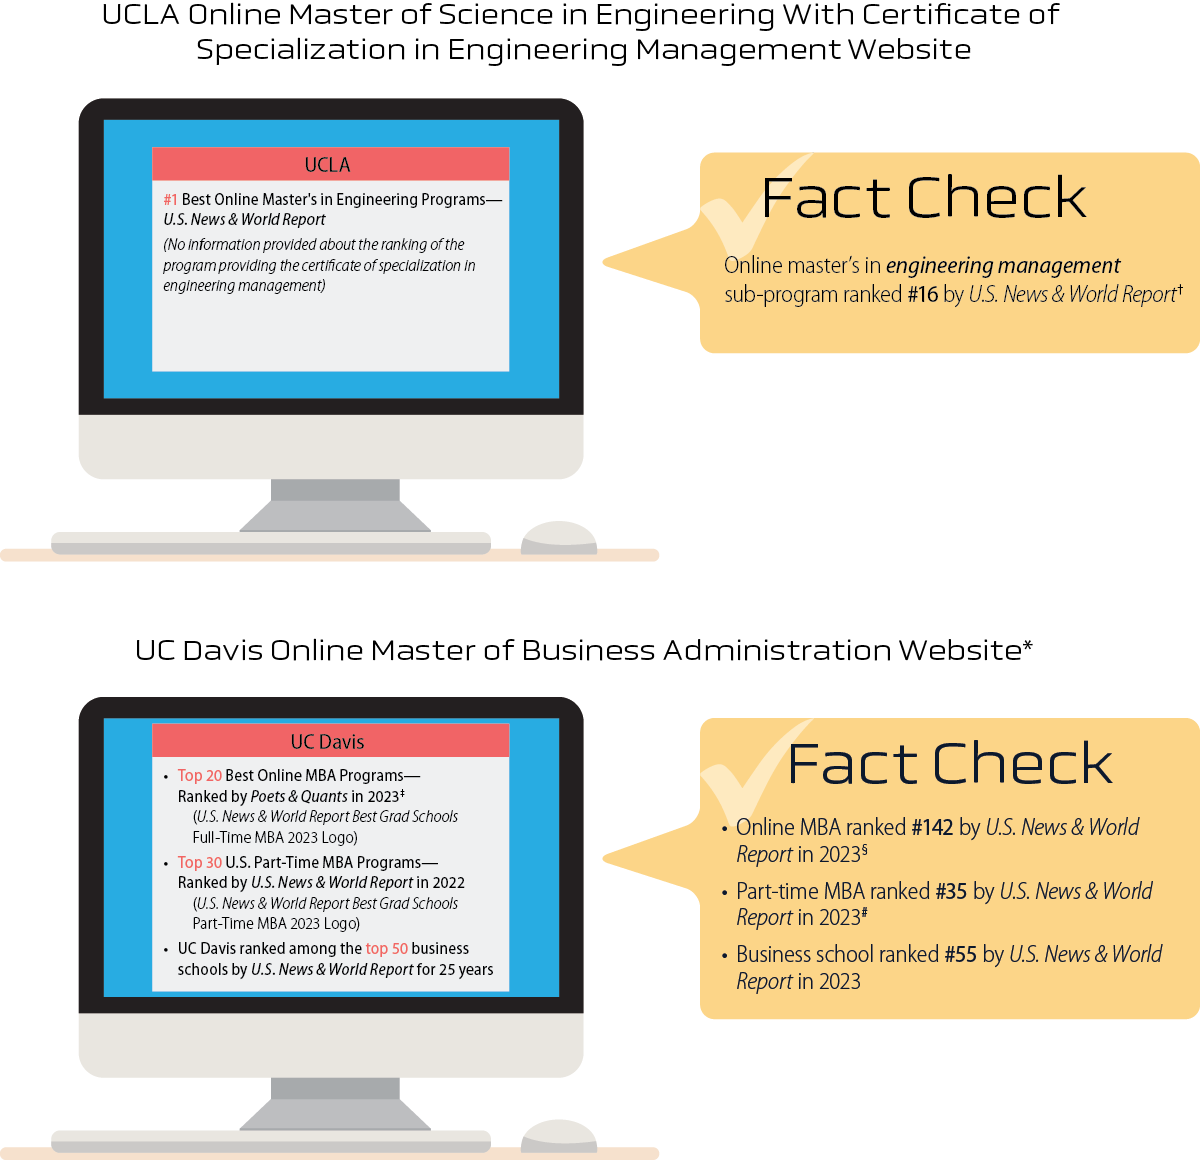 Examples of two graduate programs at UCLA and UC Davis that presented misleading or insufficient information about their program rankings on their websites, along with fact checks including the correct or full information about their program rankings.